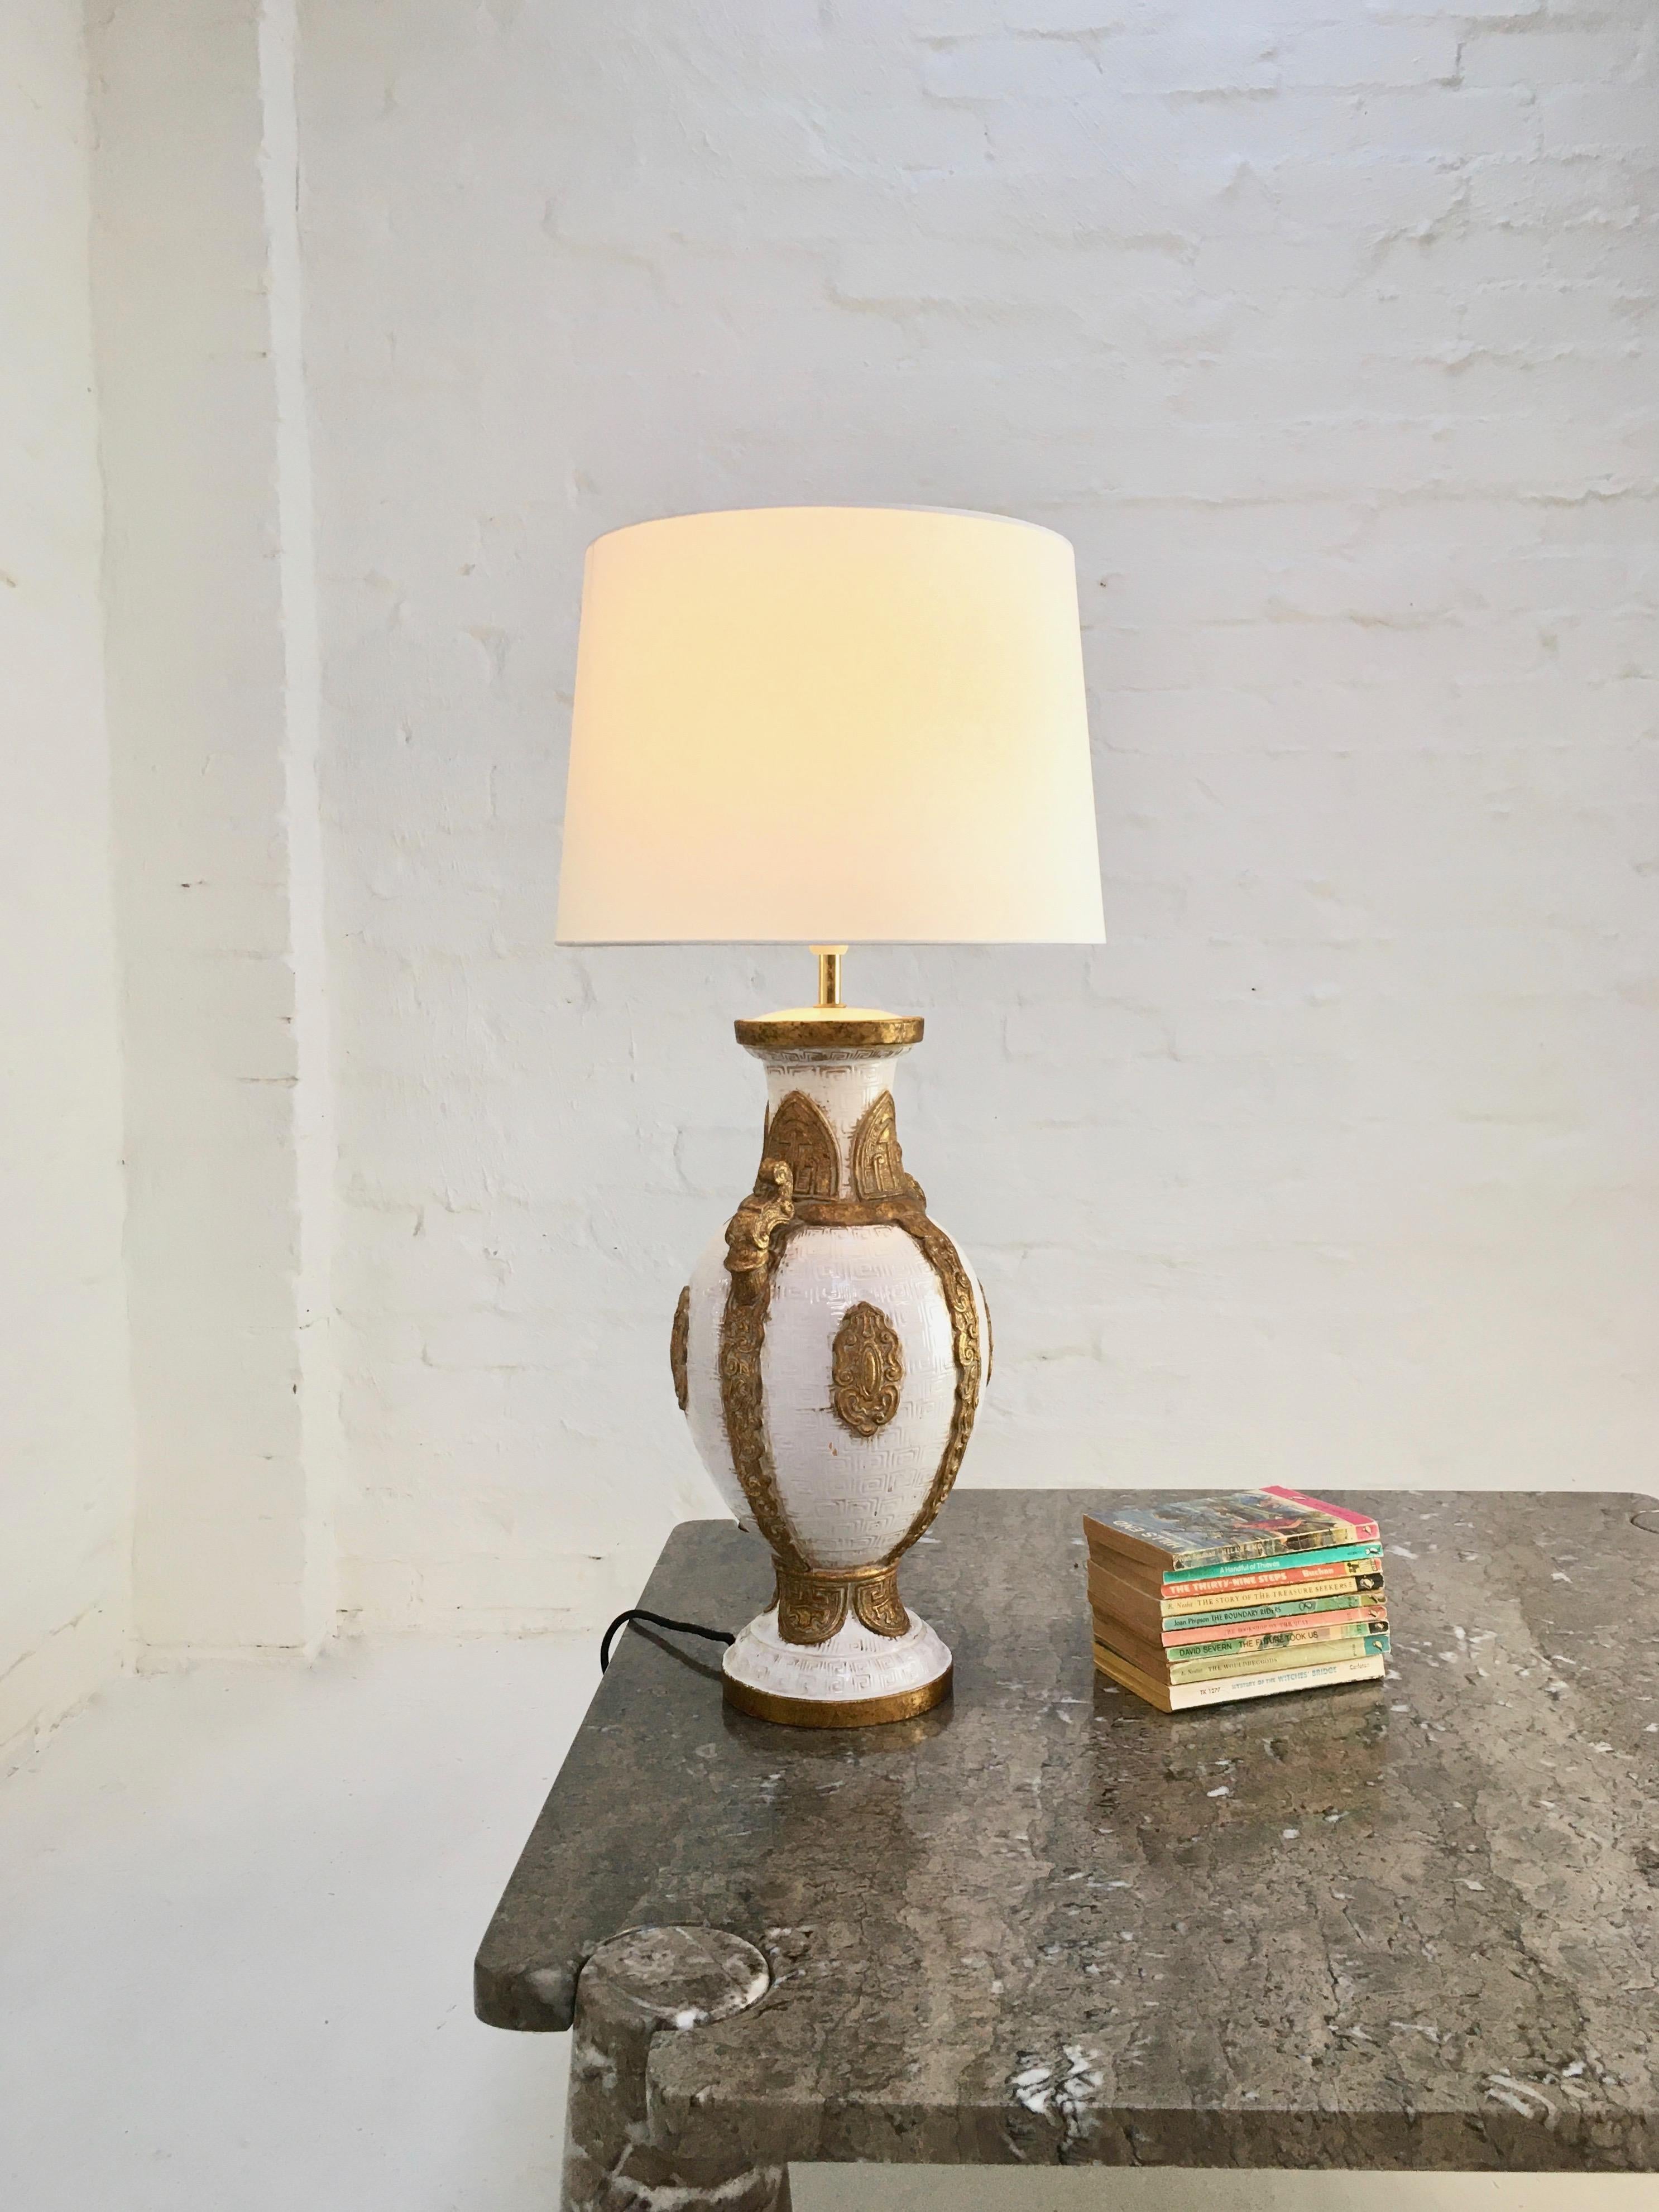 A large Hollywood Regency lamp with stylized decoration, standing 31.5 inches/80 cm tall to the top of the shade.

In keeping with the 1940s-1950s decorative style which saw large lamps move into the domestic market, this lamp is influenced by the